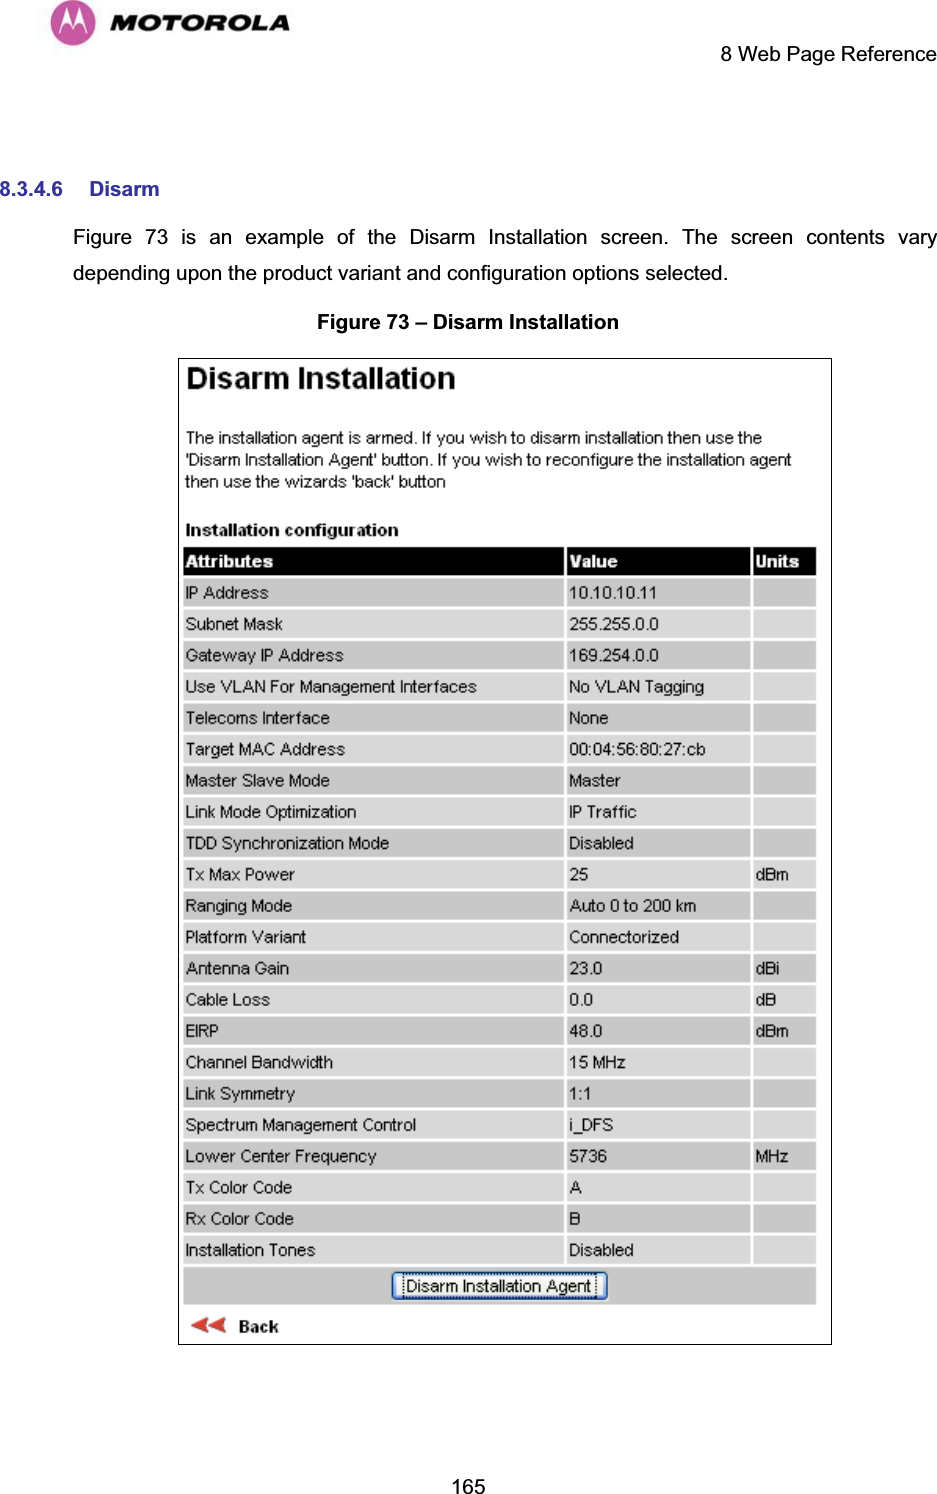     8 Web Page Reference  165 8.3.4.6 Disarm Figure 73 is an example of the Disarm Installation screen. The screen contents vary depending upon the product variant and configuration options selected. Figure 73 – Disarm Installation  